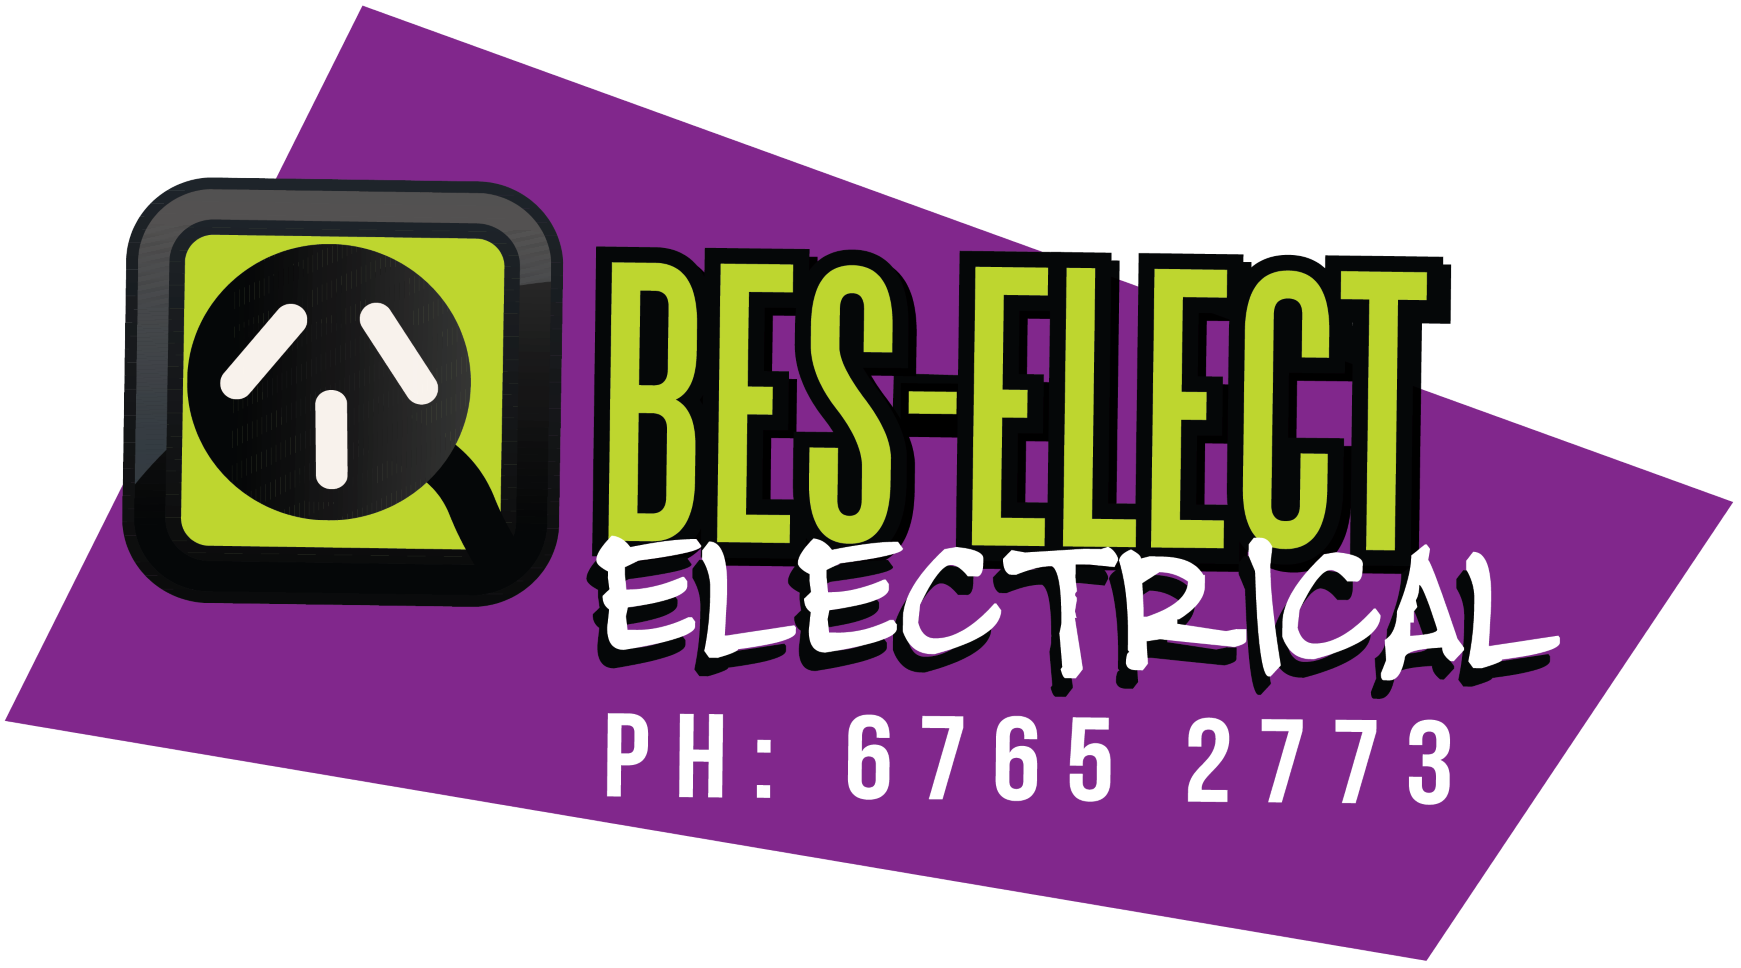 Electrician Tamworth | Bes-elect Electrical